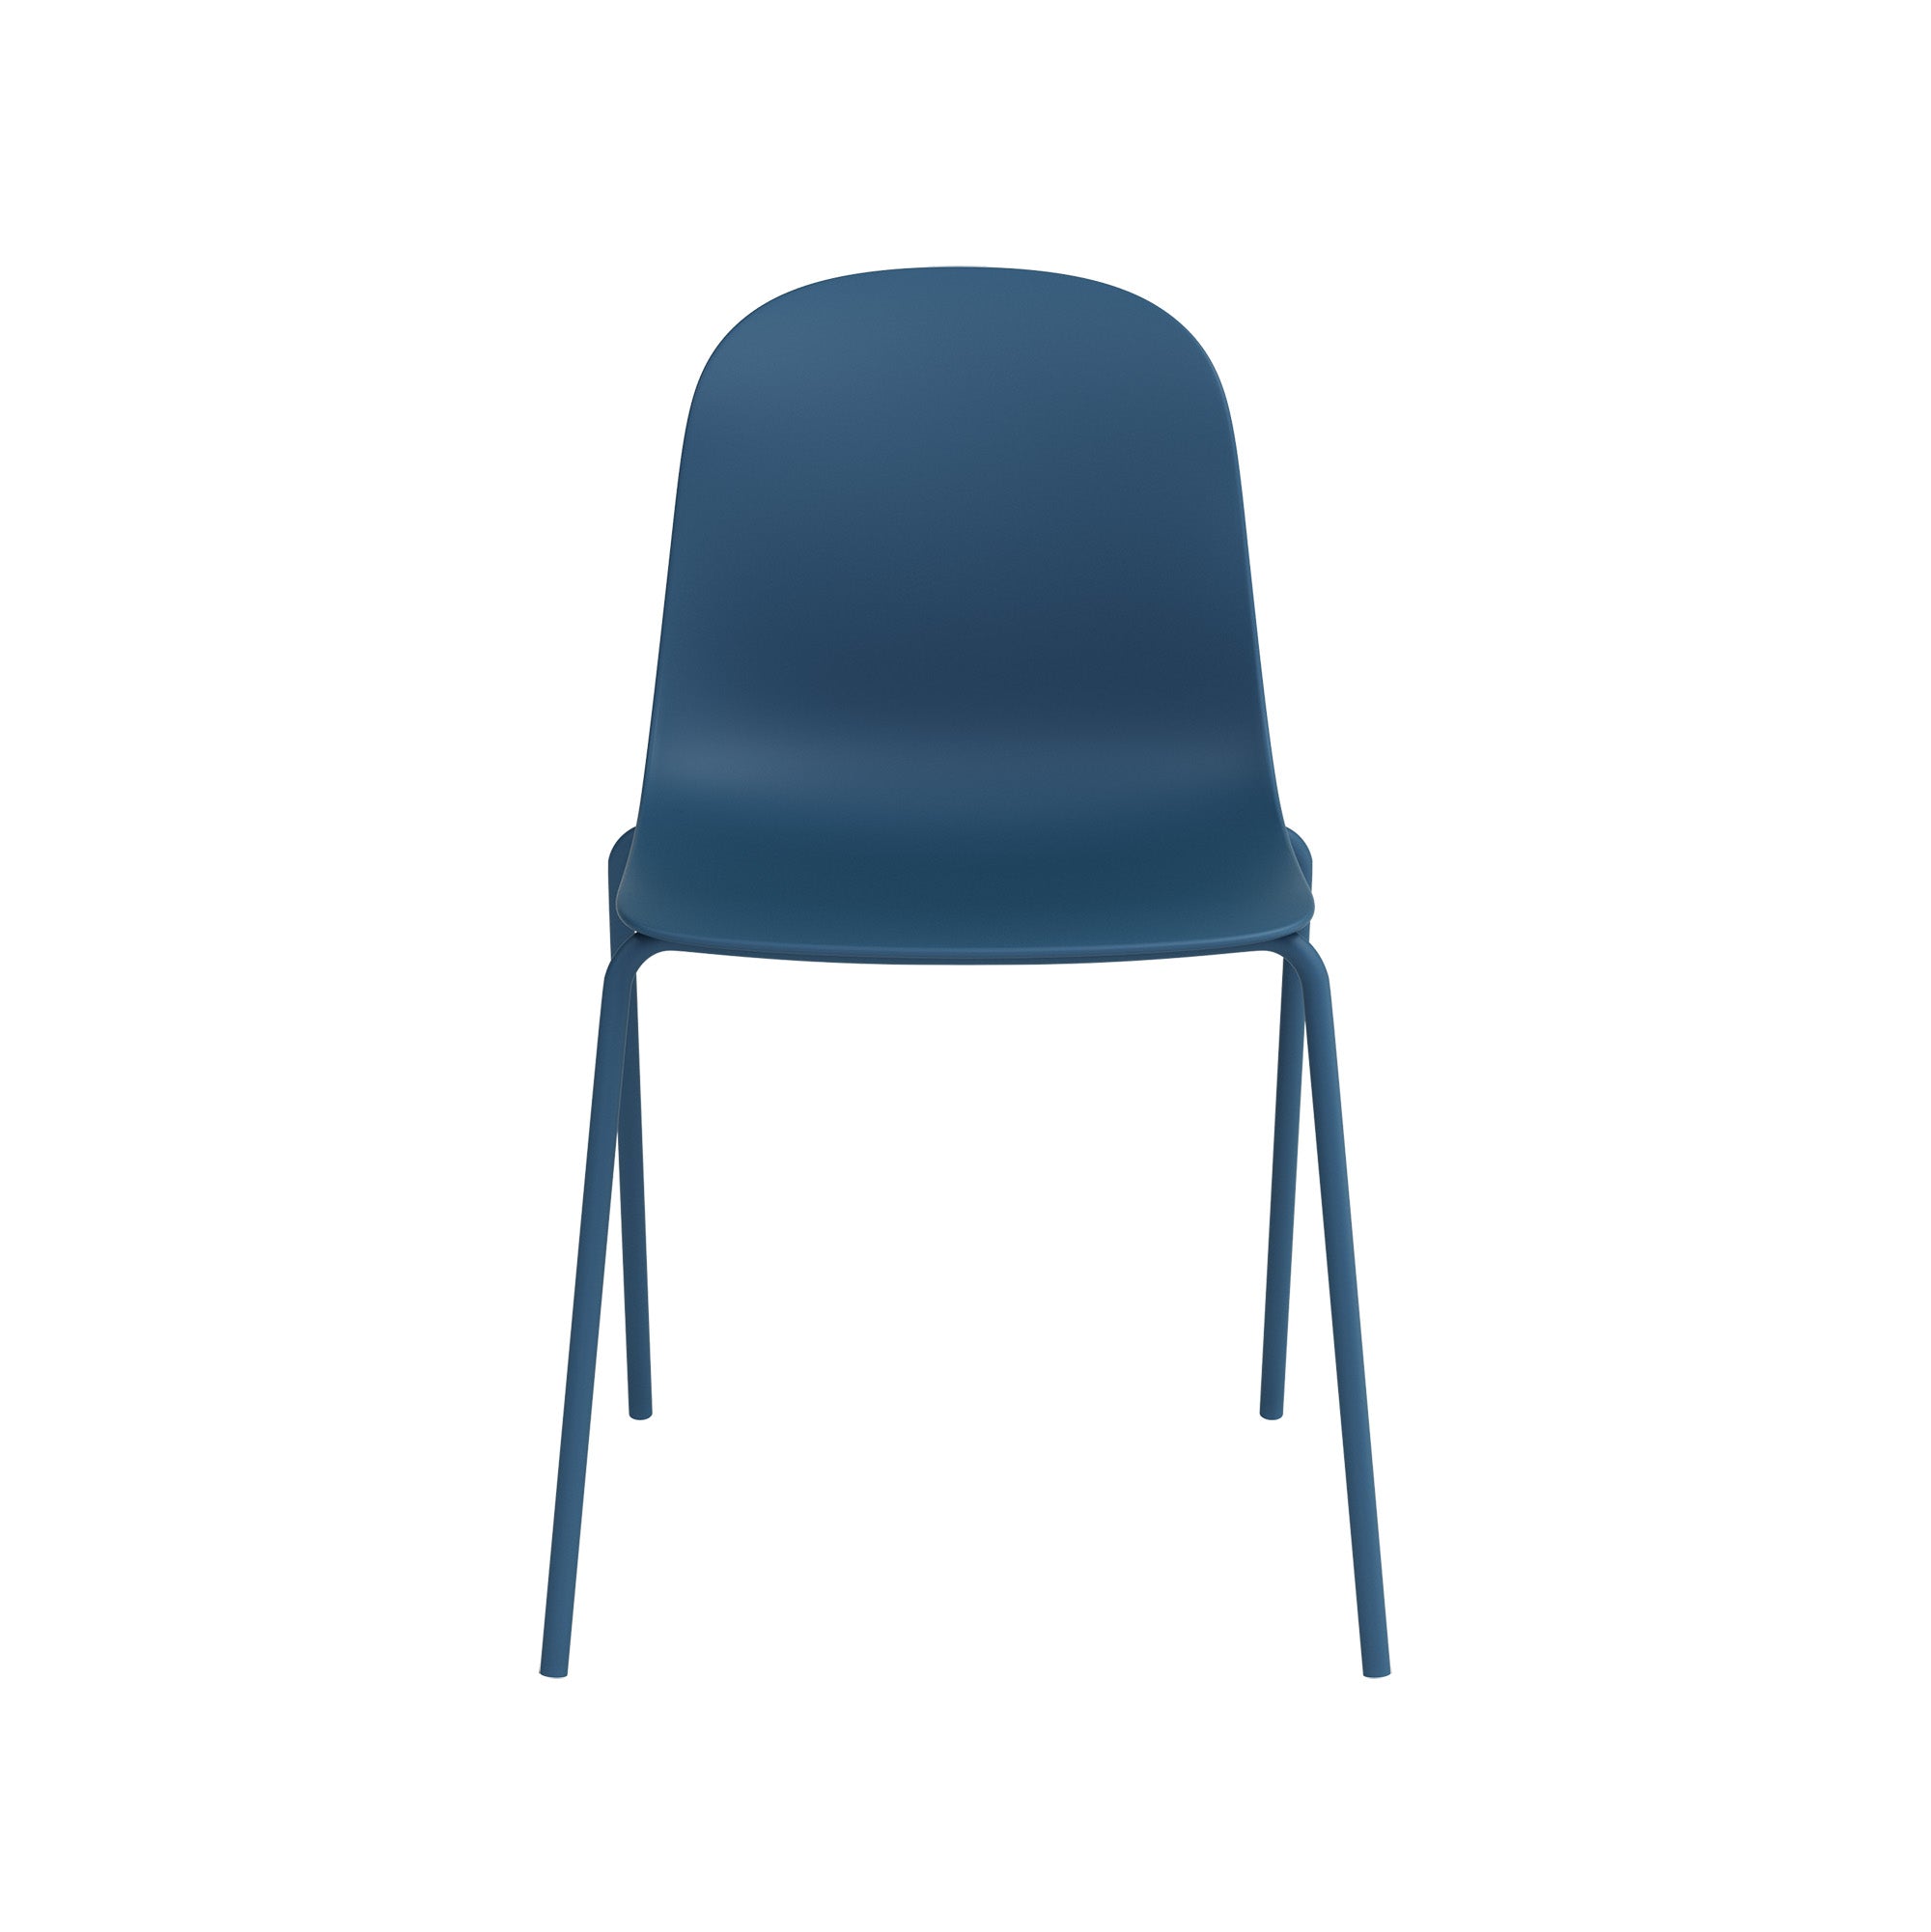 Serena Stackable Chair with Steel Frame - Berry Blue - Set of 4